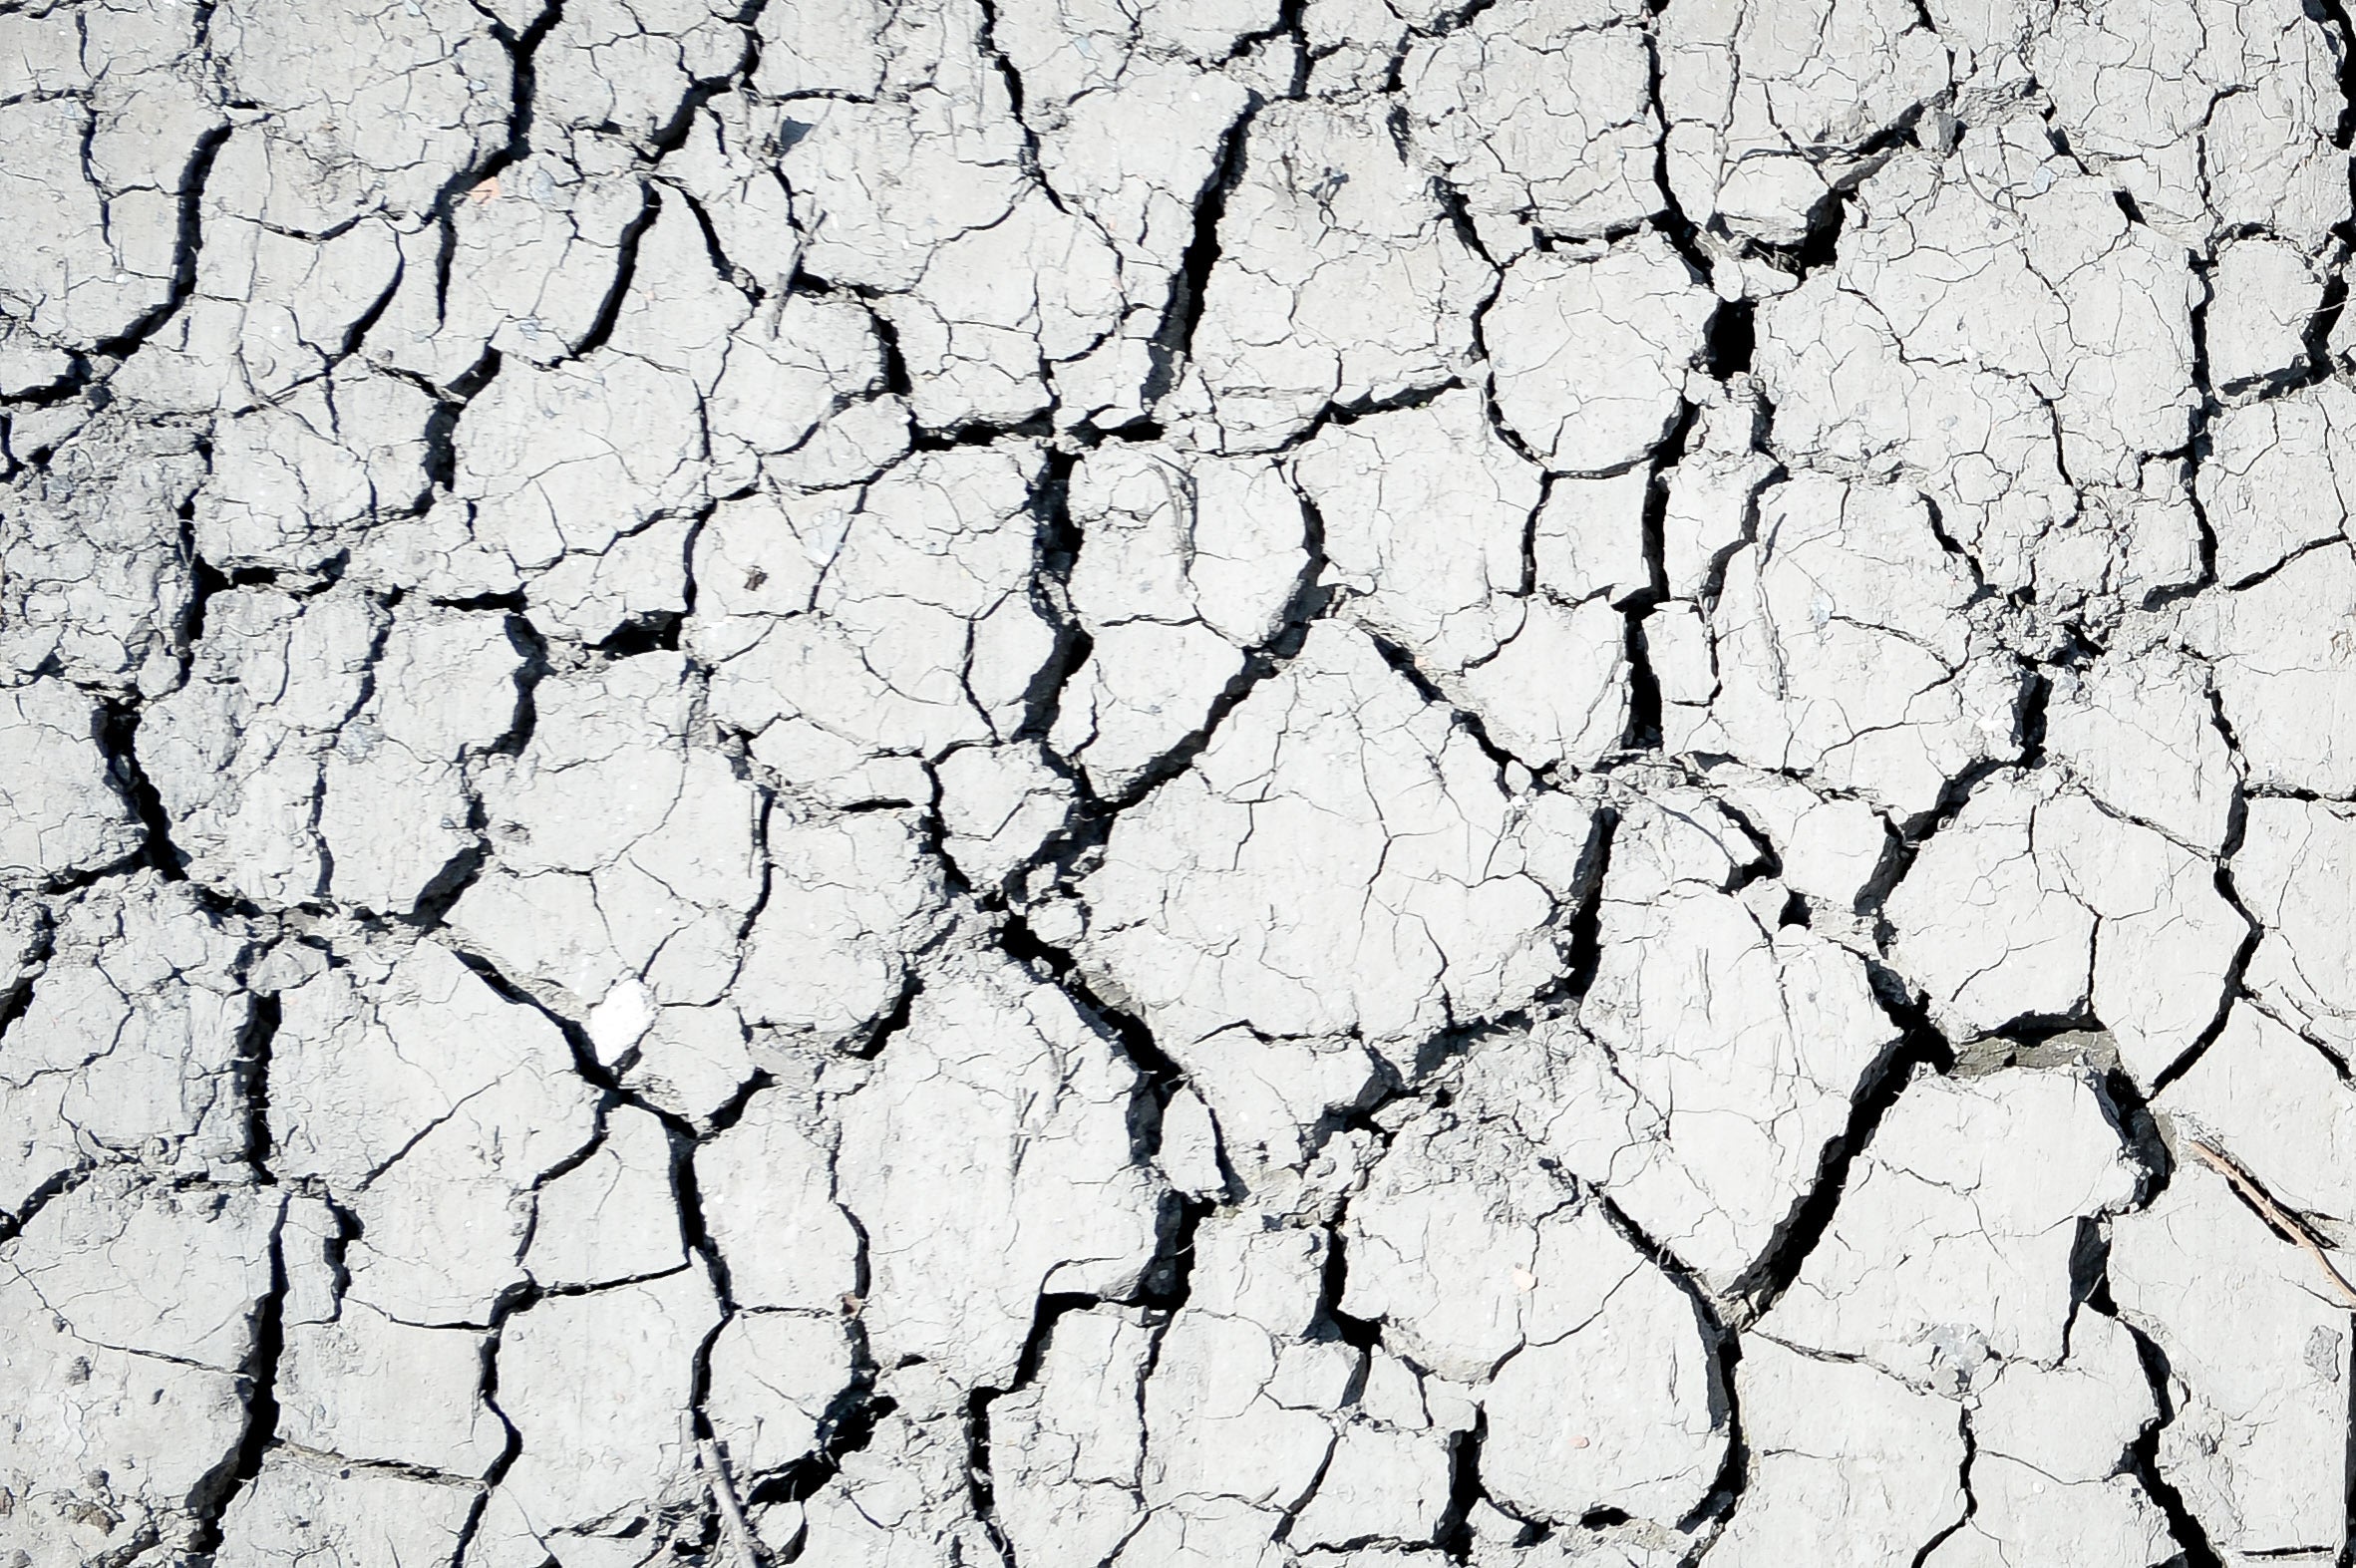 Cracked mud seen amid drought risk (Ben Birchall/PA)